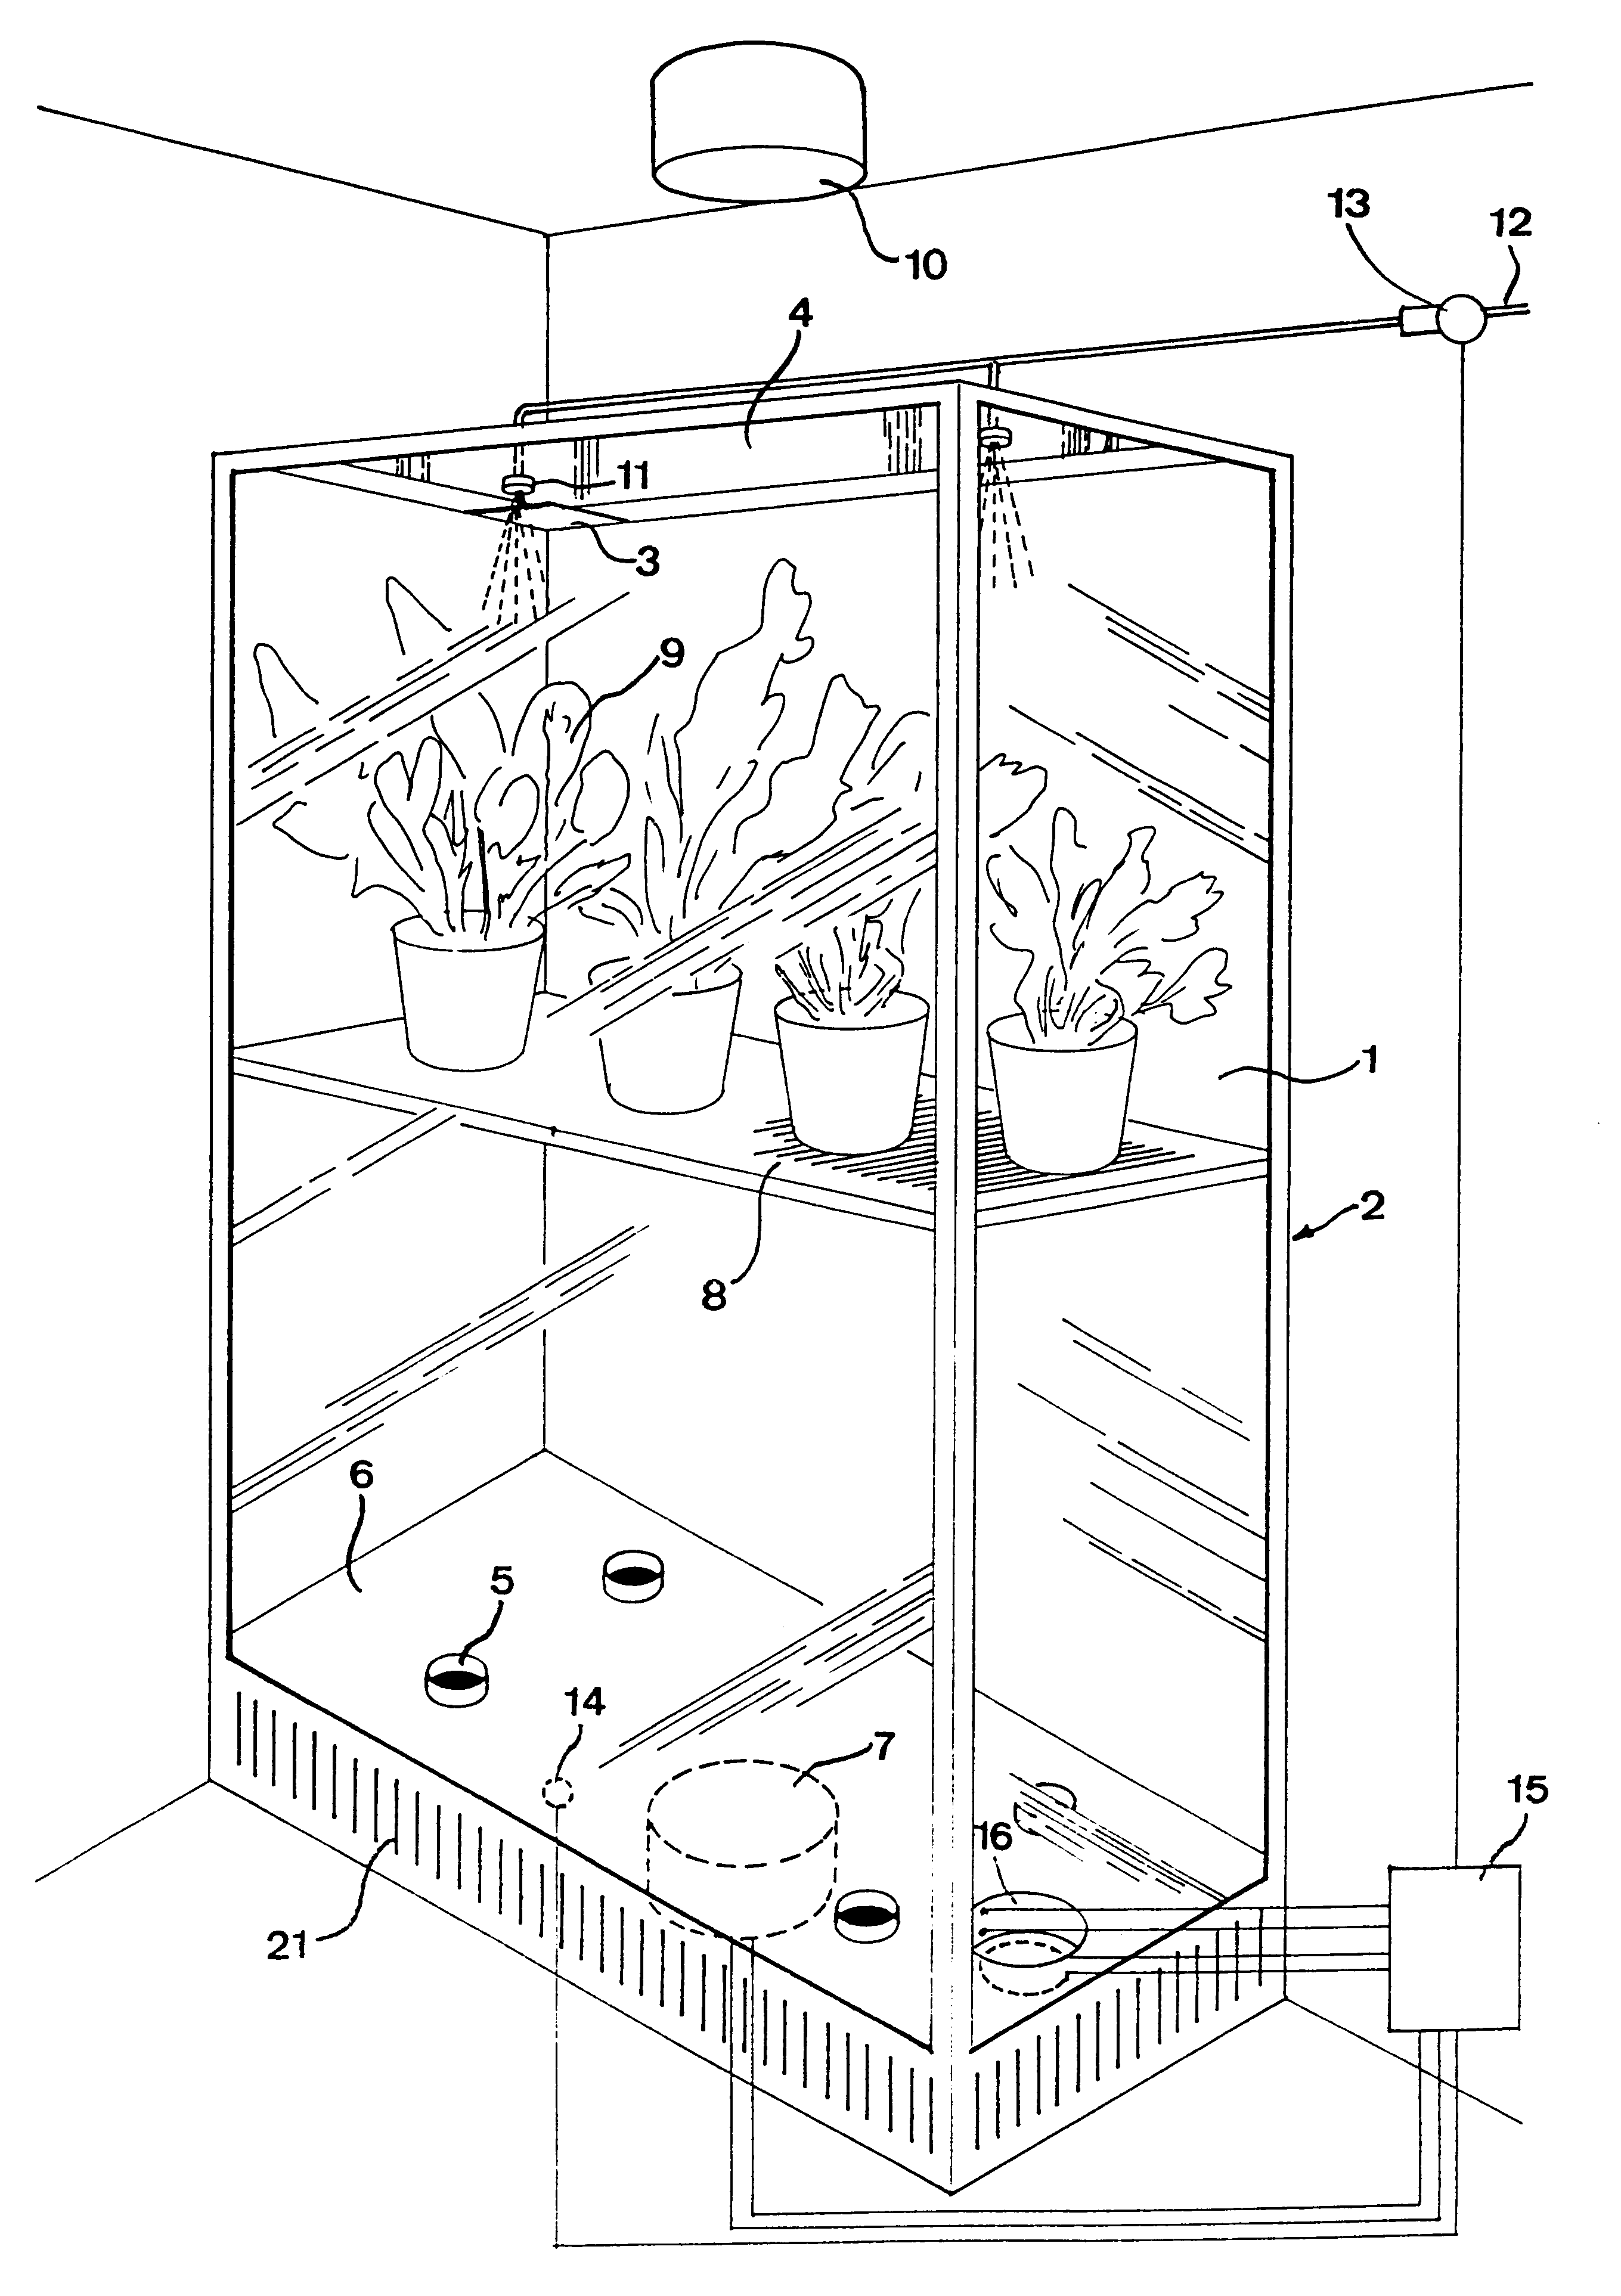 Device for improving the quality of indoor air